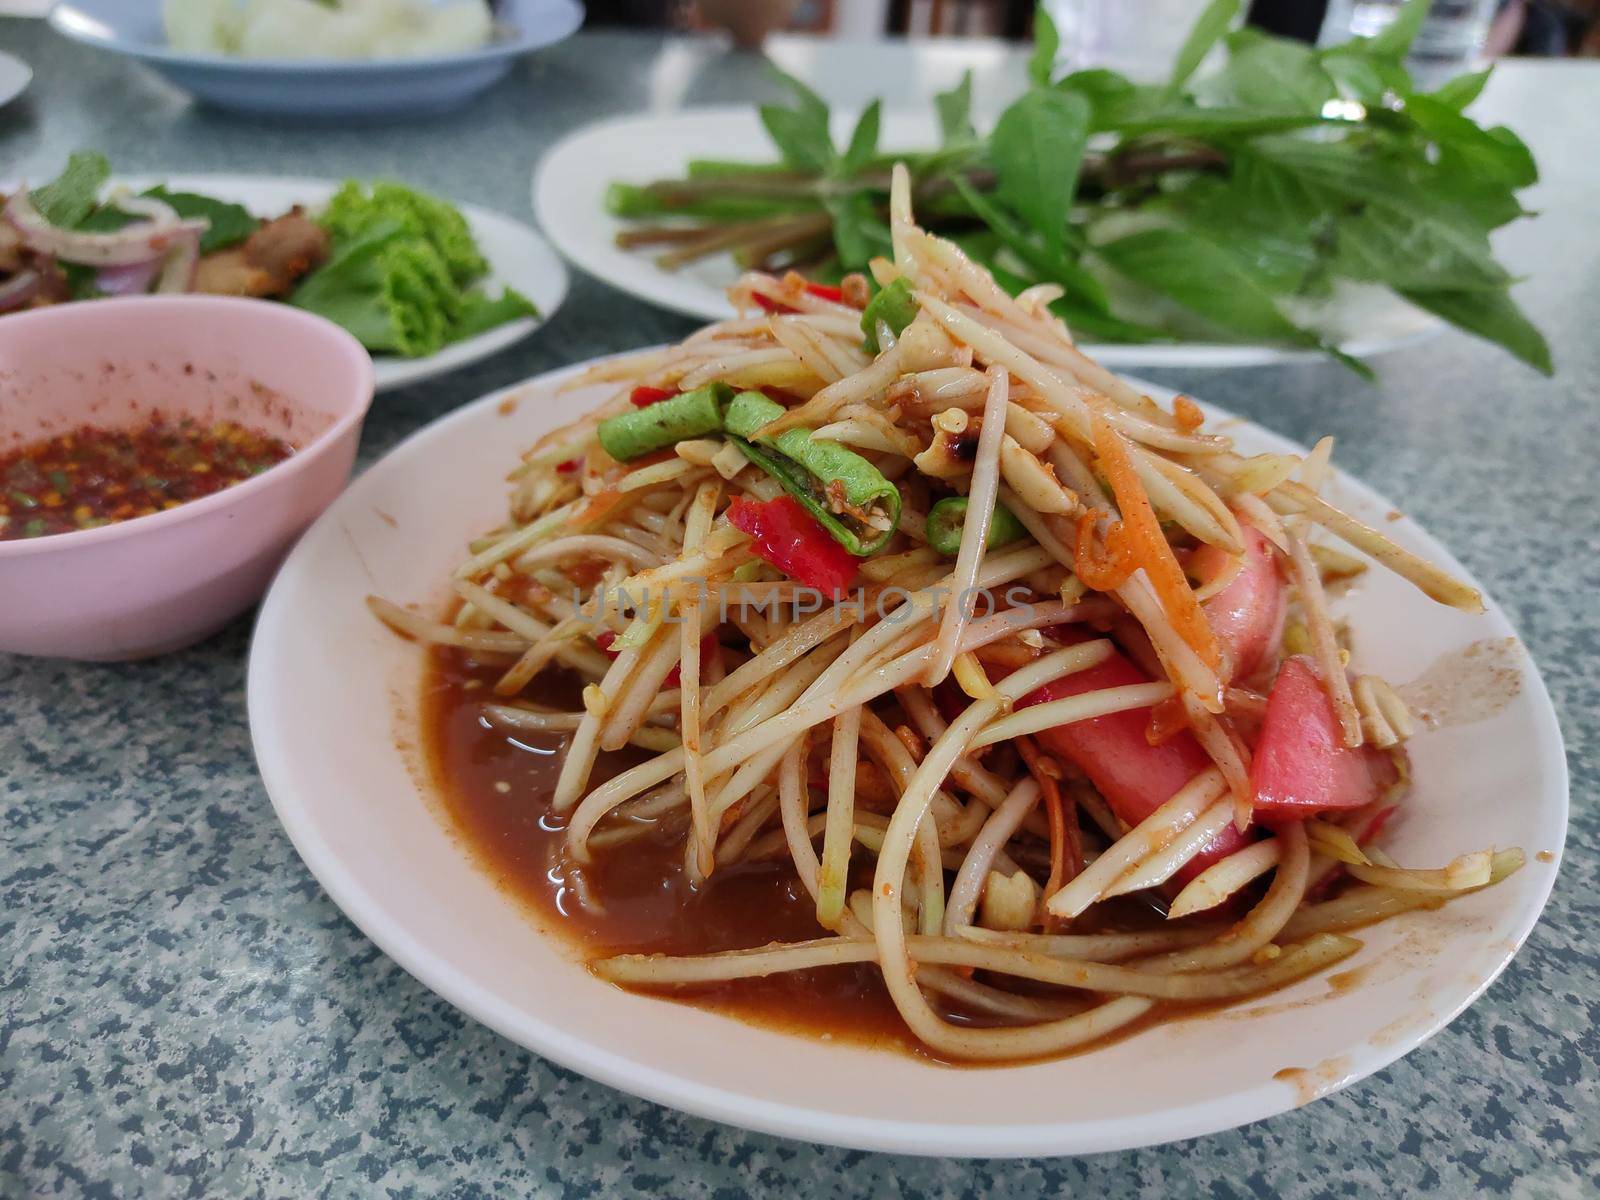 The Famous Thai food, papaya salad or what we called "Somtum" in Thai, side view